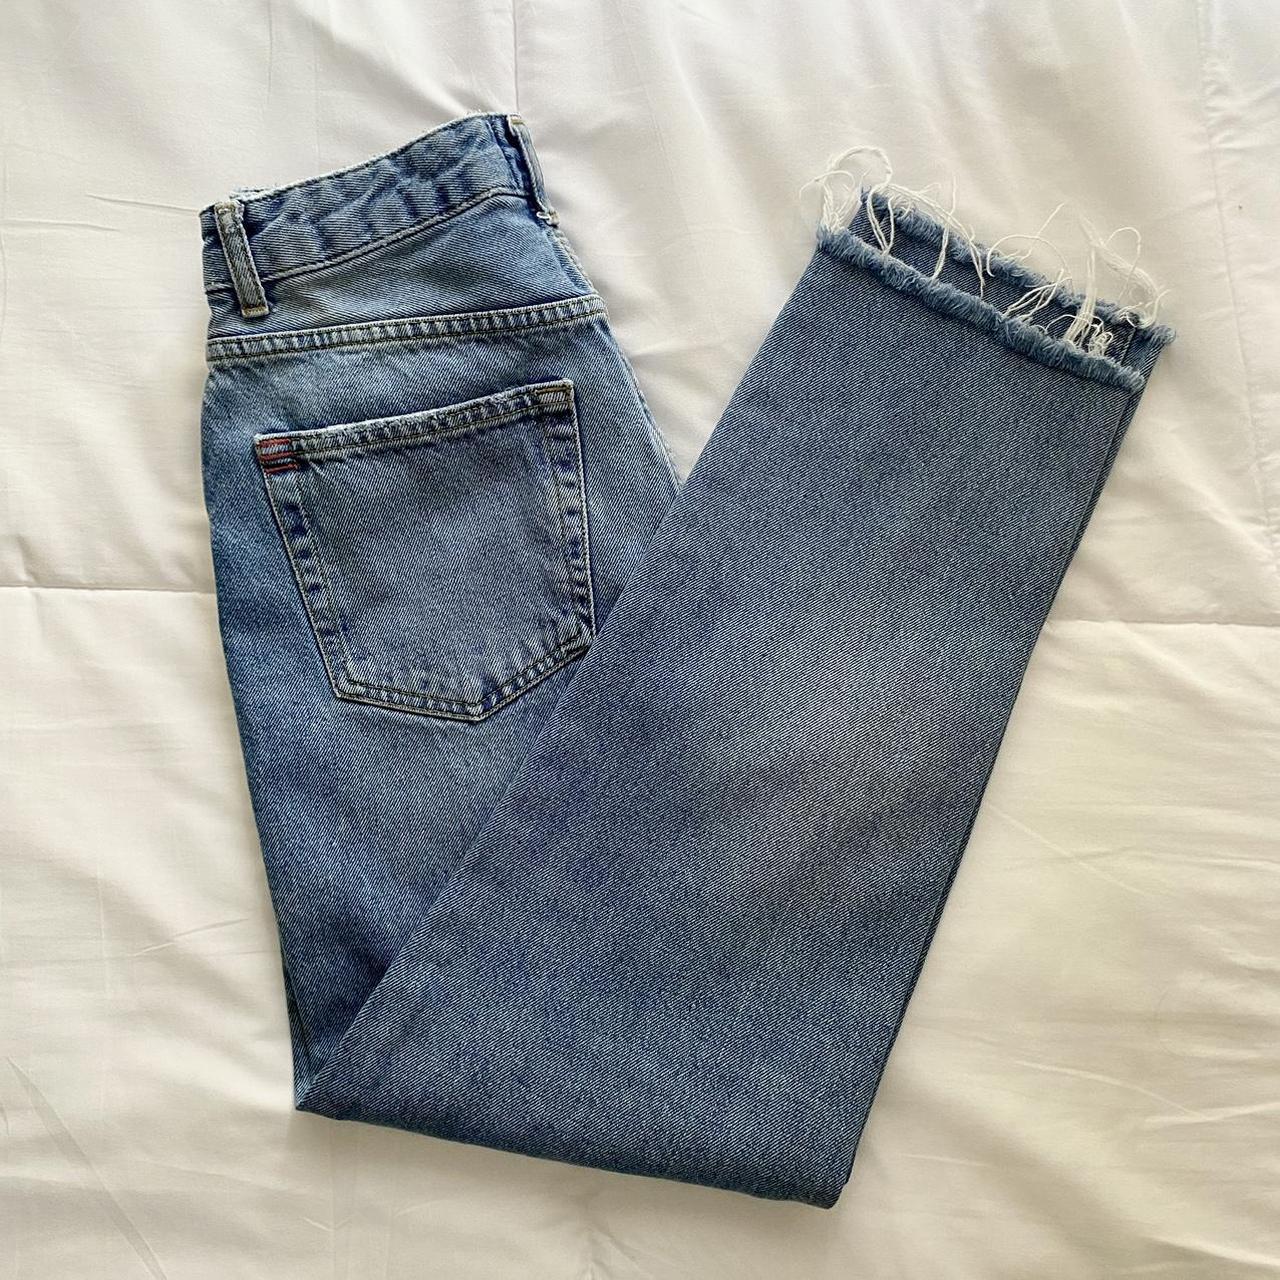 urban outfitters jeans - Depop